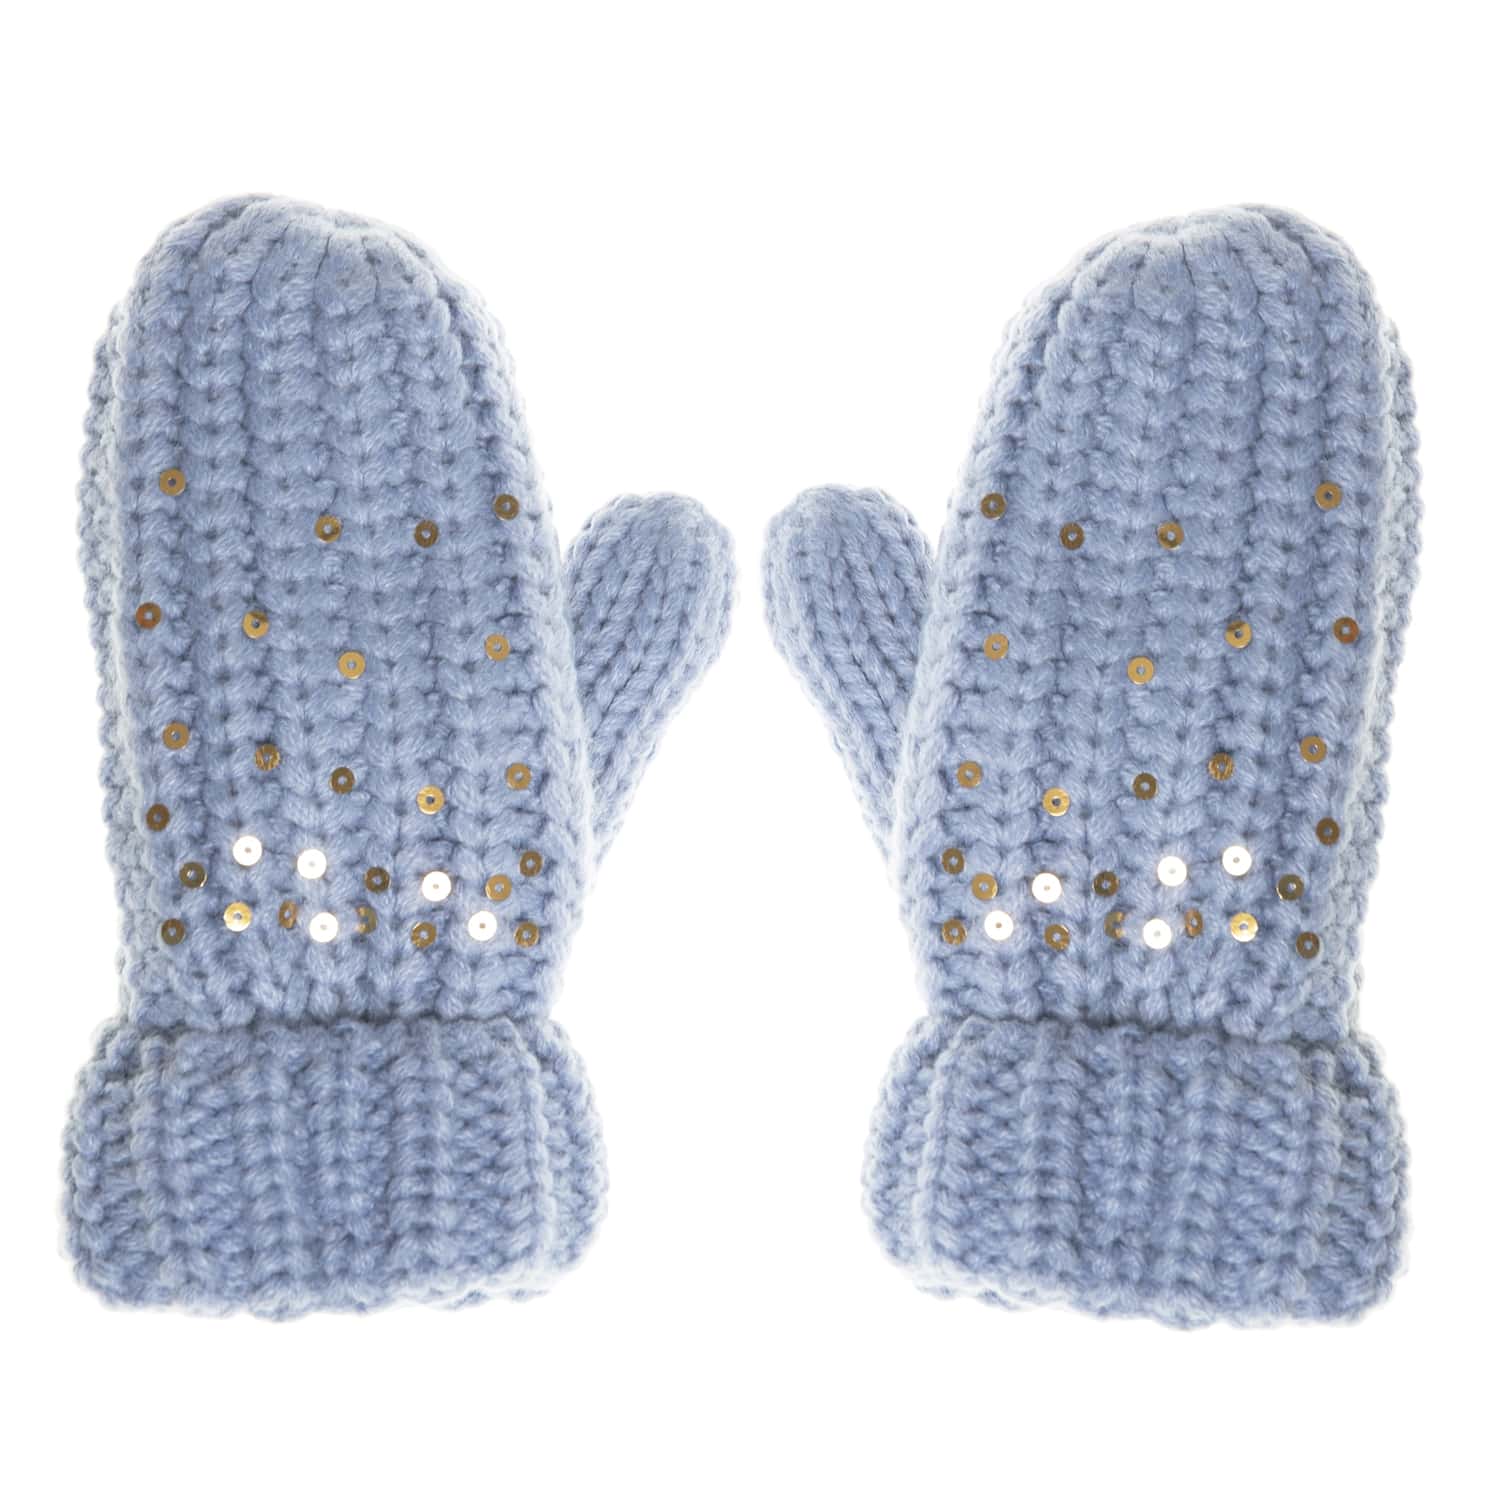 rockahula pale blue gloves with sequins